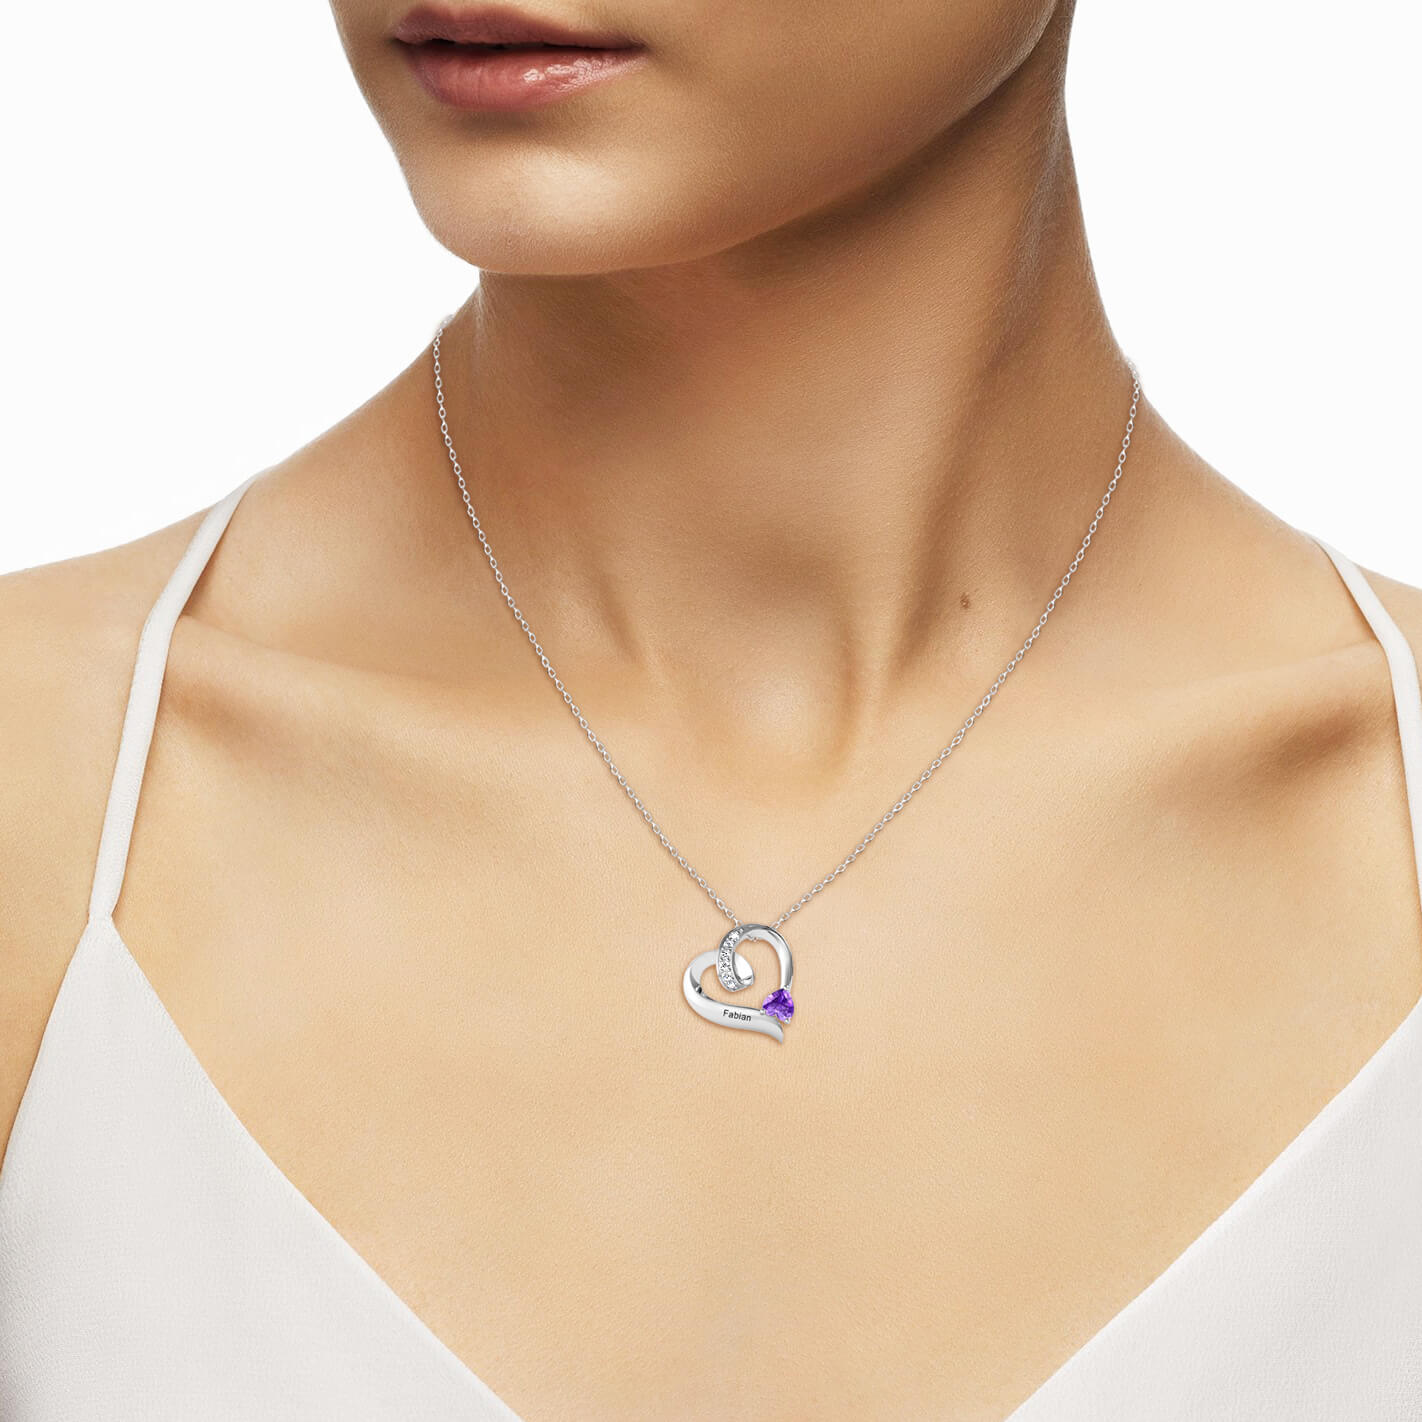 Personalised Engraved Heart Shaped Birthstone Necklace